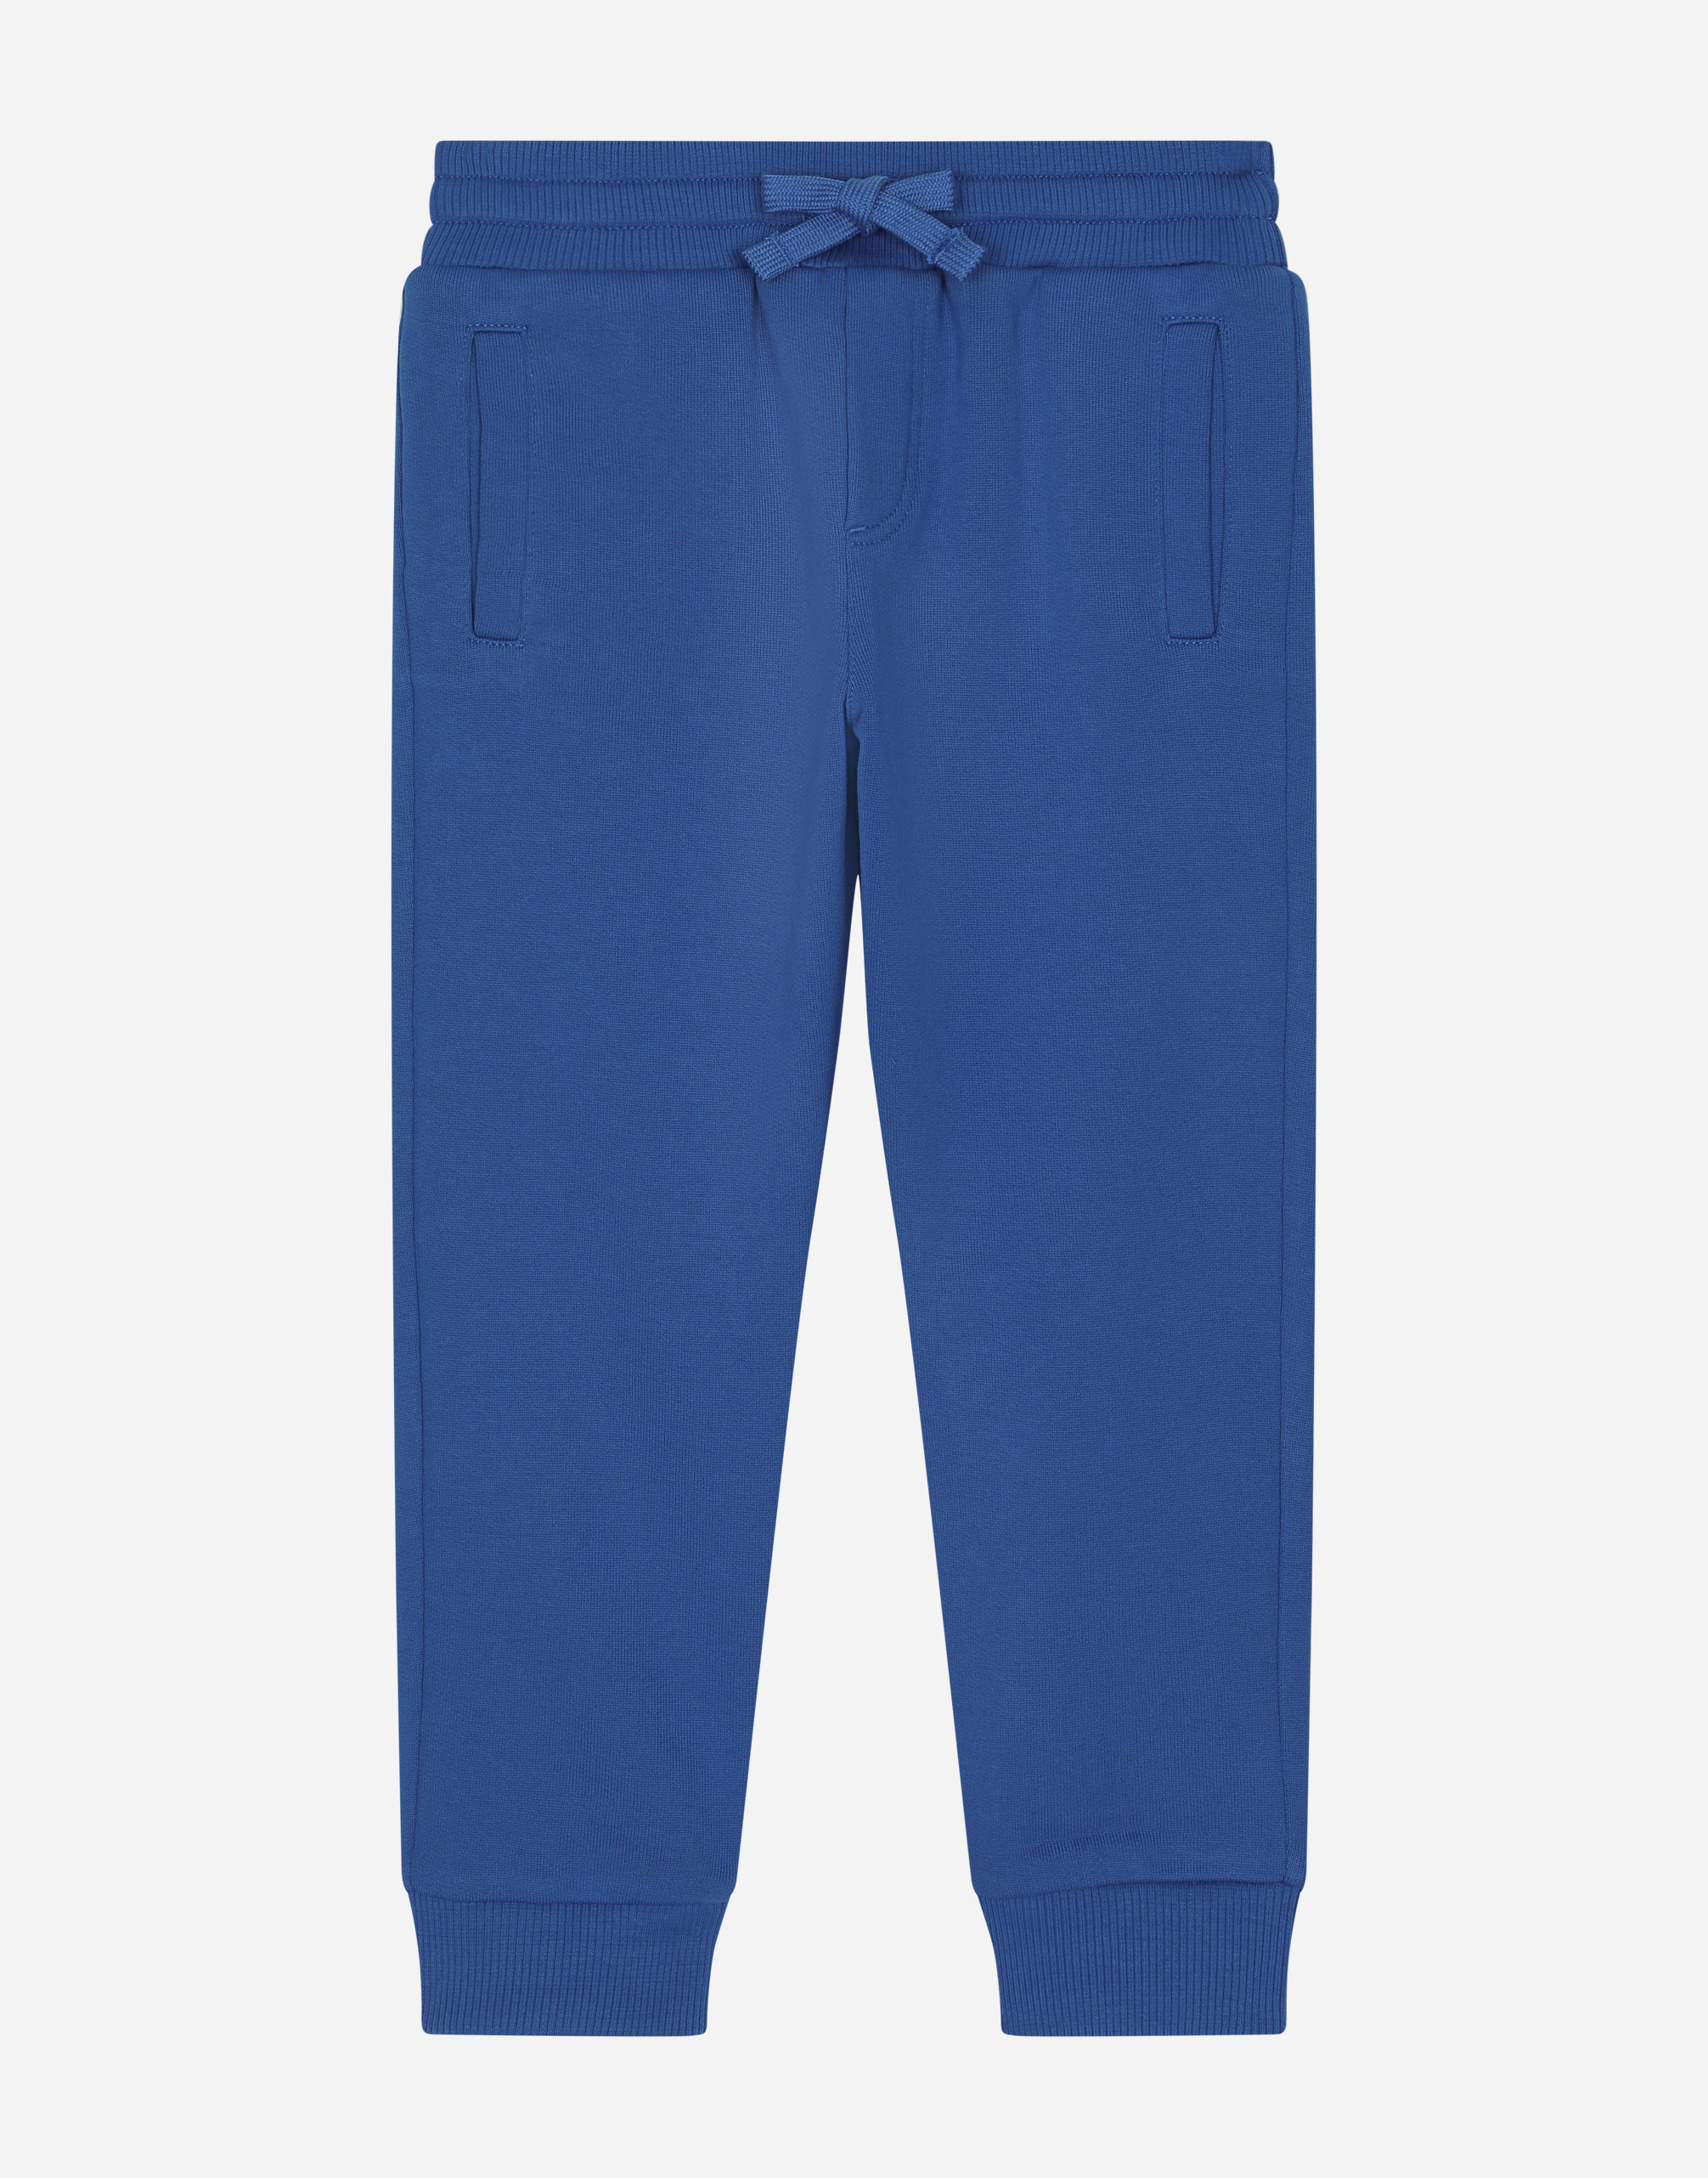 Jersey jogging pants with logo plate in Turquoise